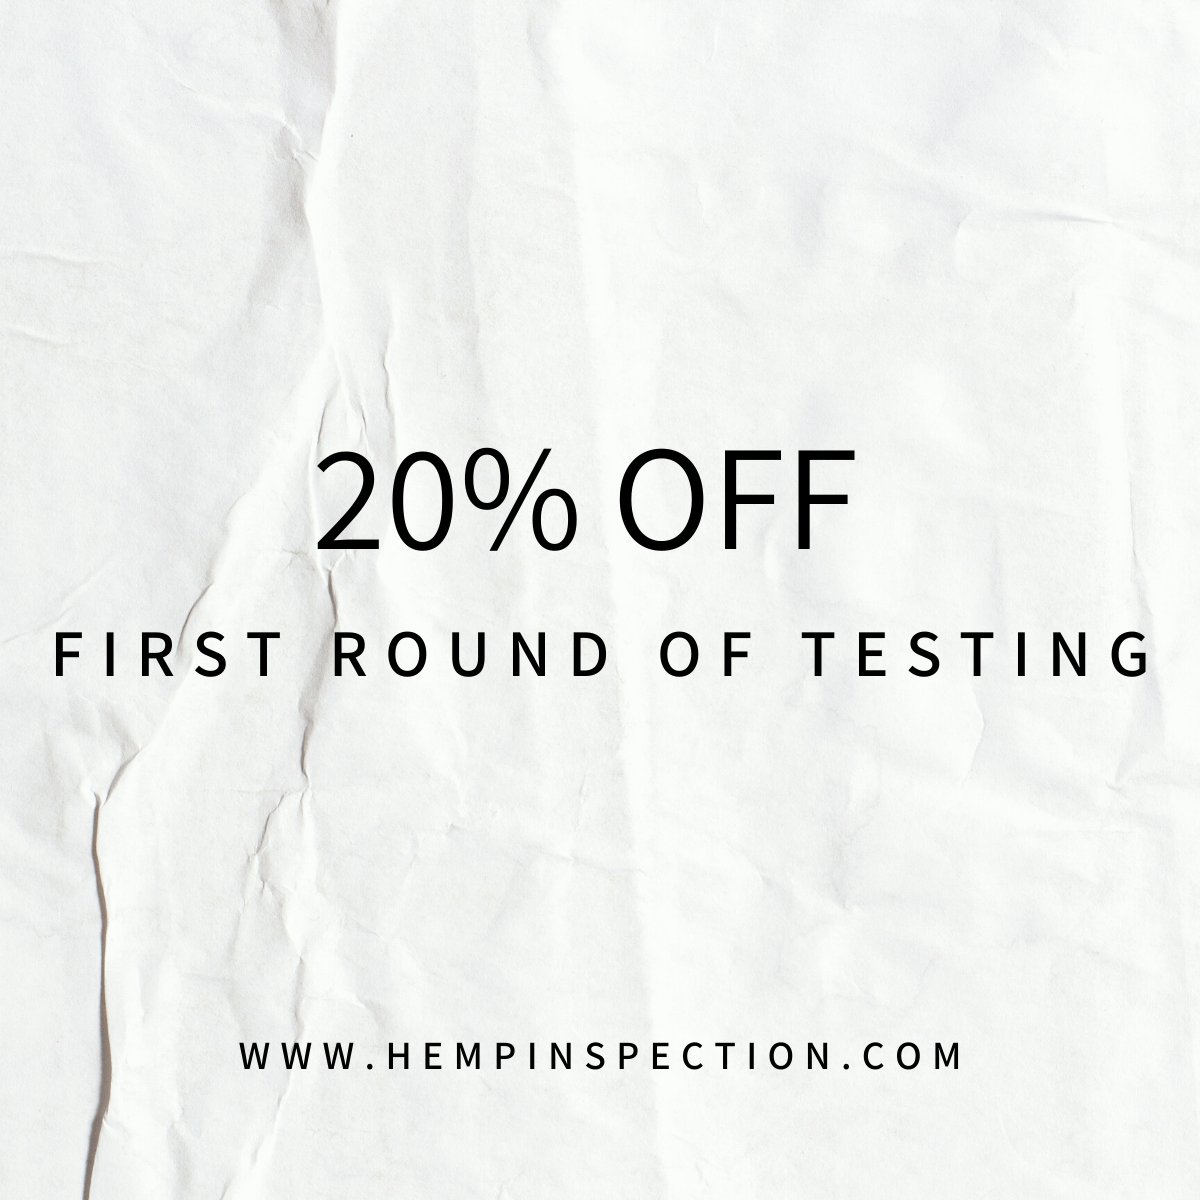 🌿✨ Seeking trustworthy hemp testing? You're in luck! Our ISO/IEC 17025:2017 accredited lab is extending a 20% discount for first-time customers. Access top-notch testing at an unbeatable price. Visit our website to seize this exclusive offer! #HempTesting #QualityServices 💯🔬